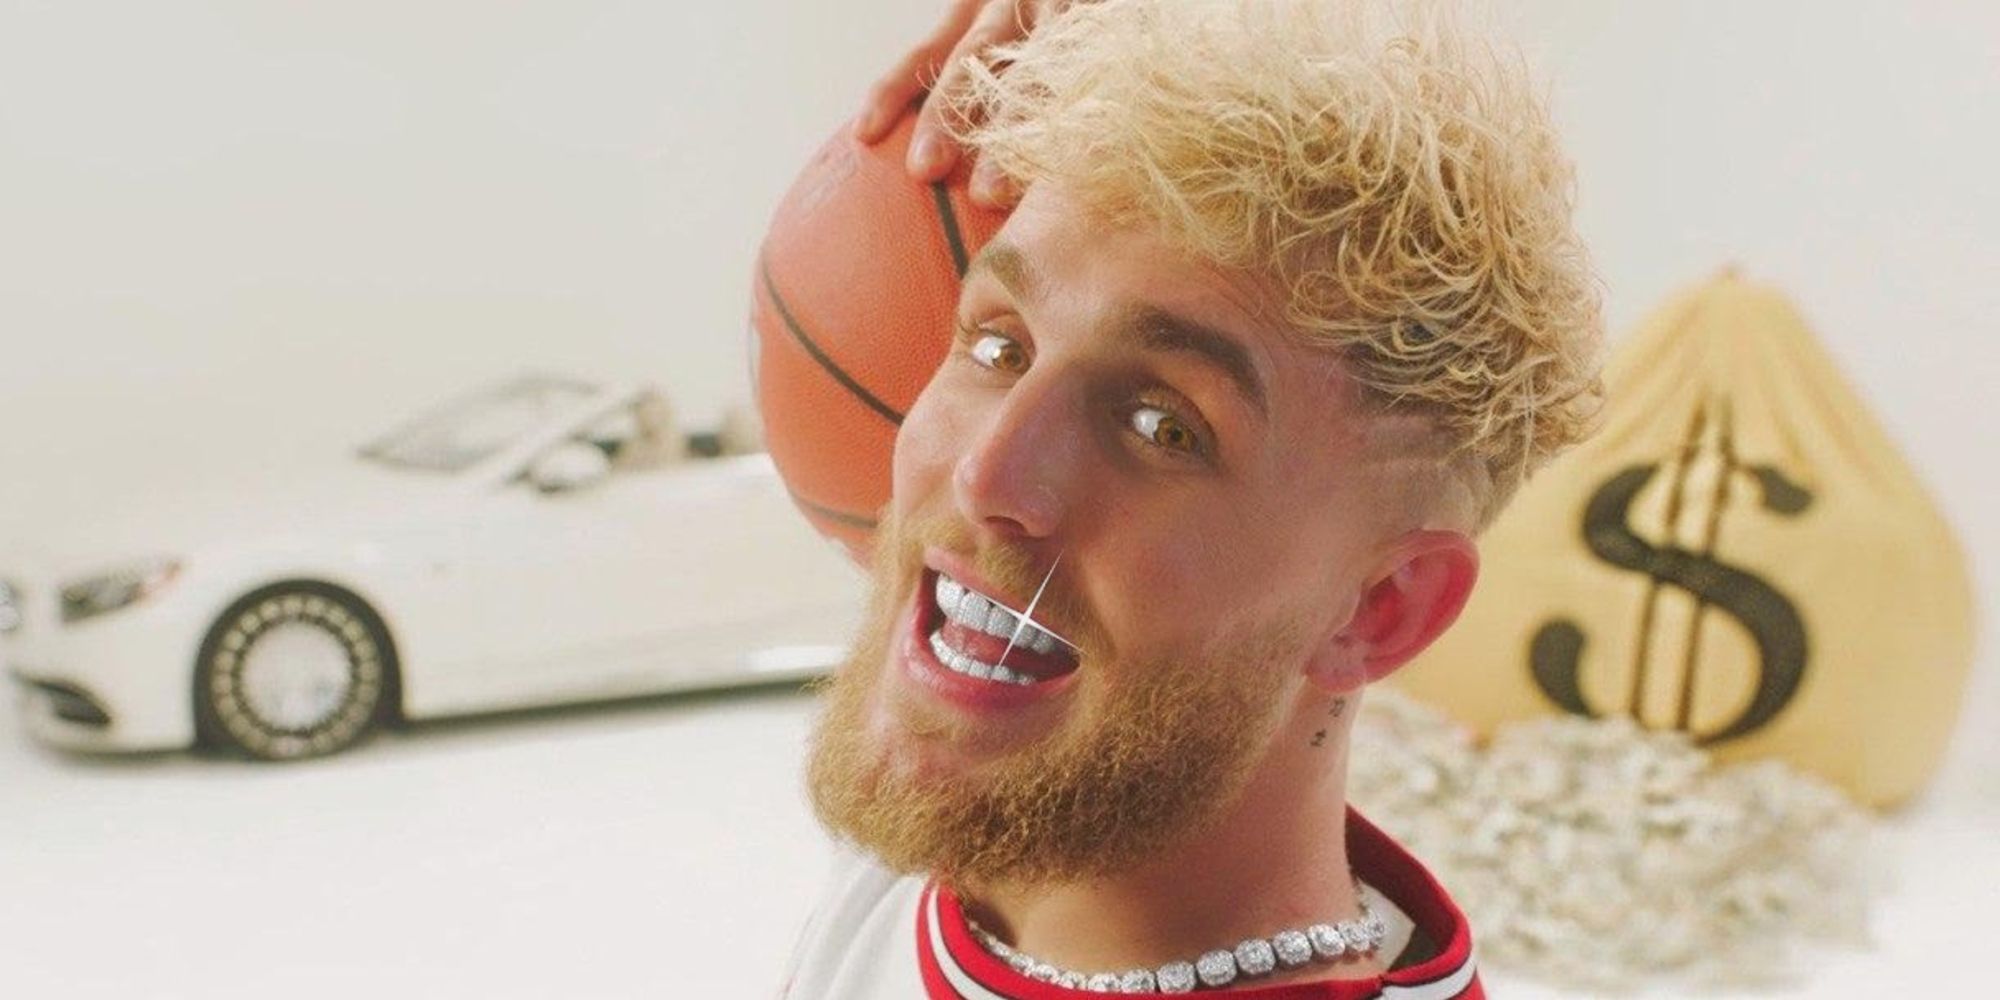 Jake Paul in the 23 music video